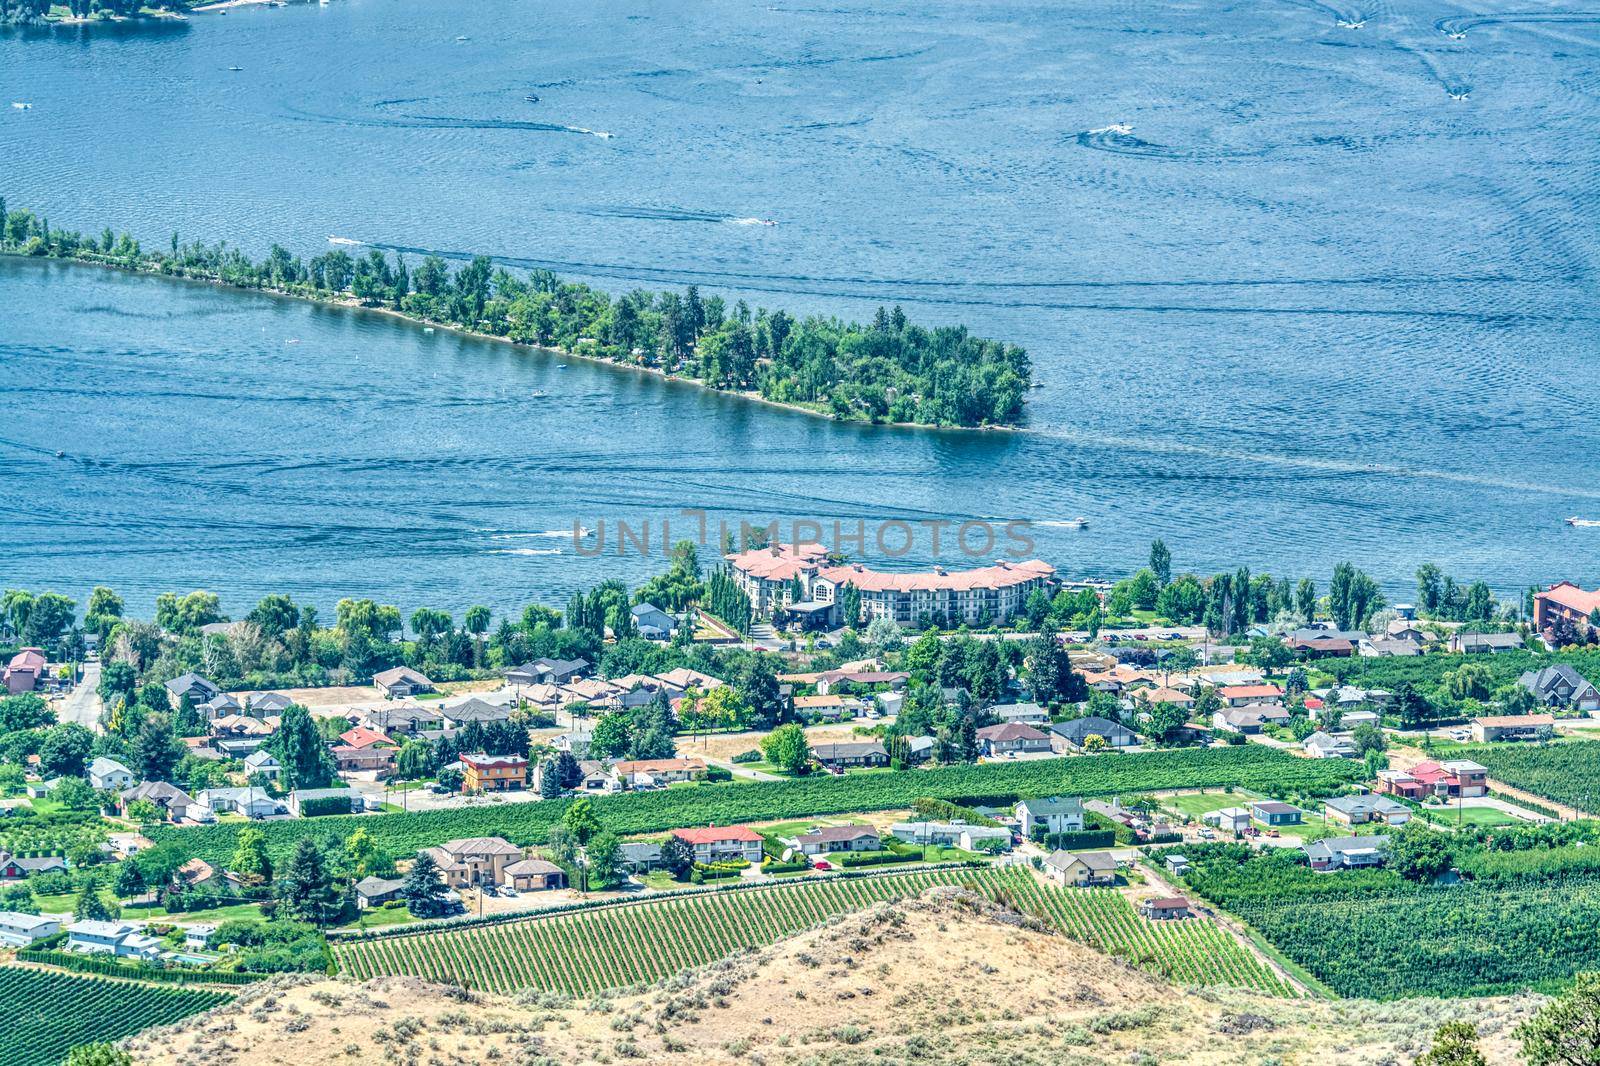 Resort area overview and residential houses on Osoyoos lake, British Columbia by Imagenet